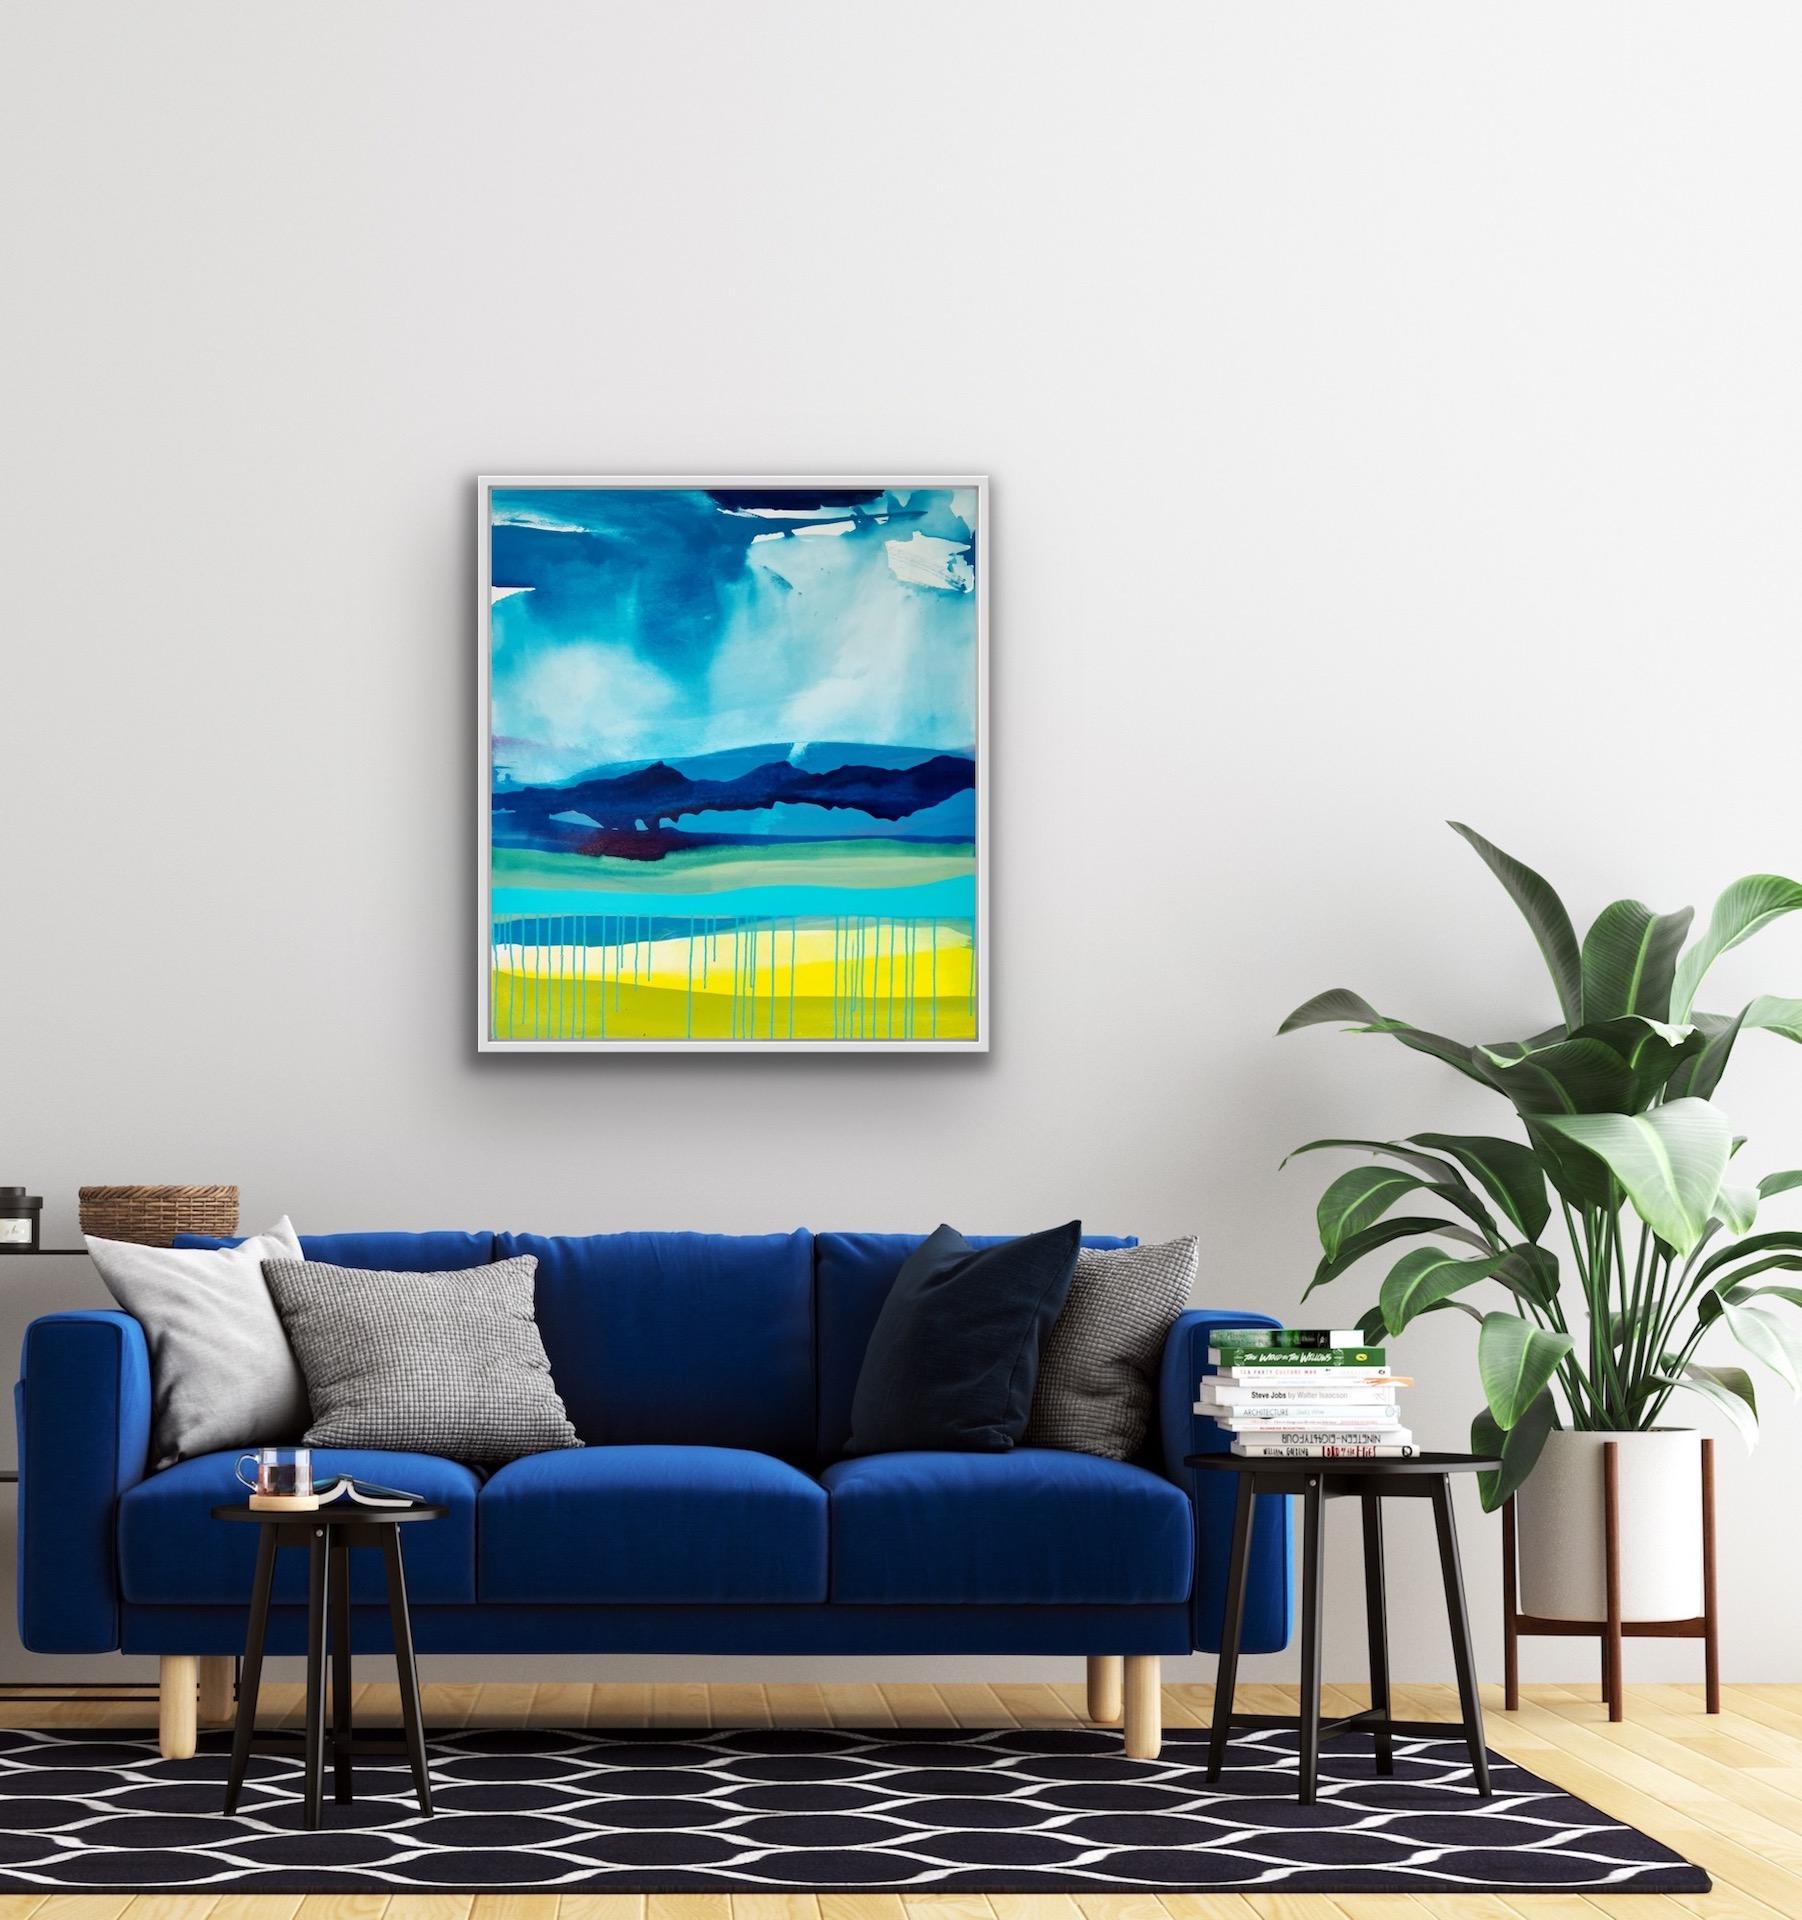 Claire Chandler
Blue Skies
Original Abstract Painting
Image Size: H 95cm x W 85cm
Sold Unframed
(Please note that in situ images are purely an indication of how a piece may look).

I began this painting in March 2020 when we first went into lock